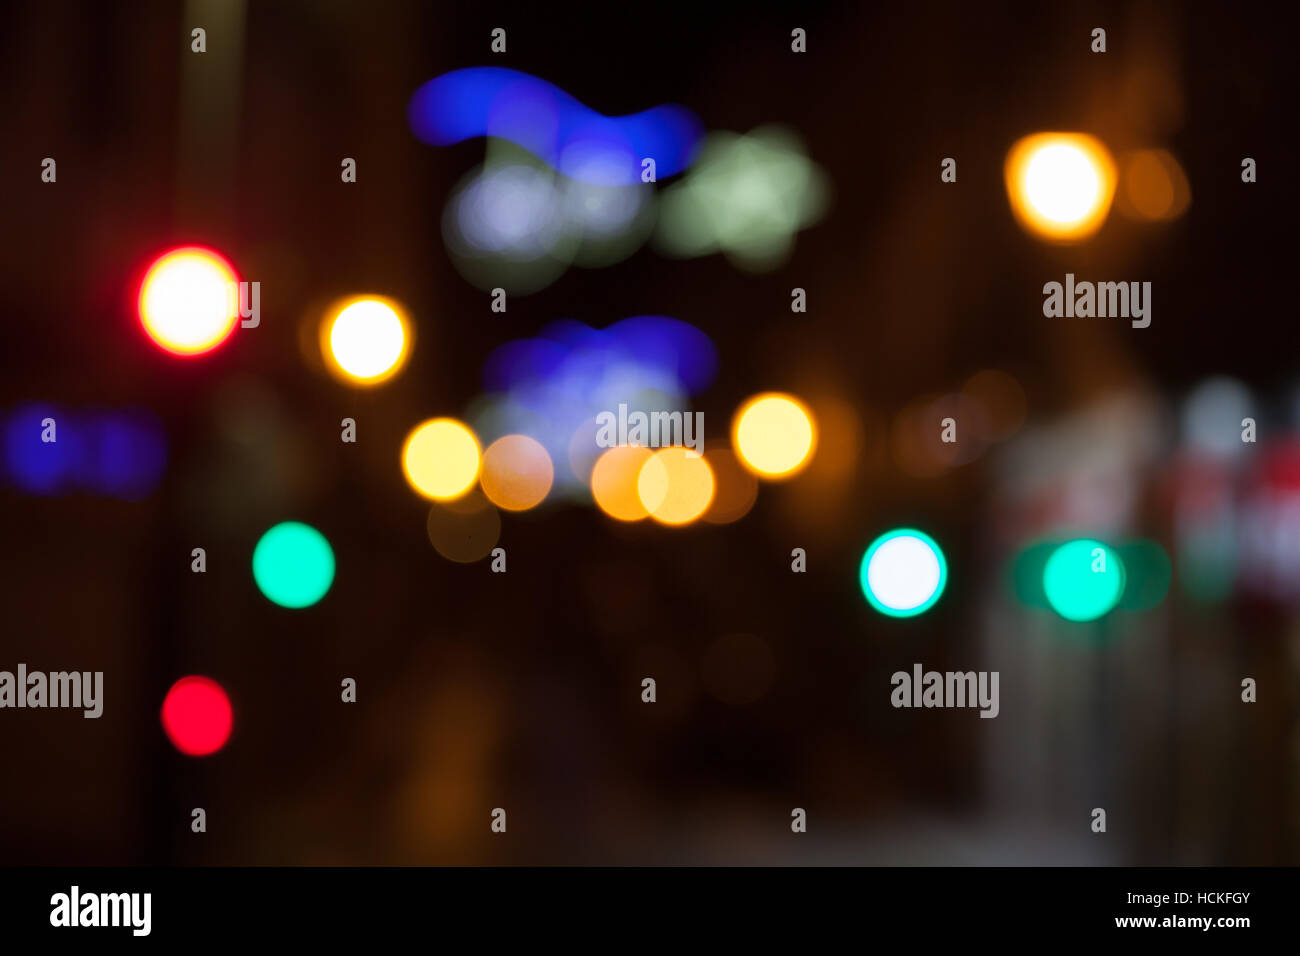 Christmas lights of different colors.Get out of focus of lights Stock Photo